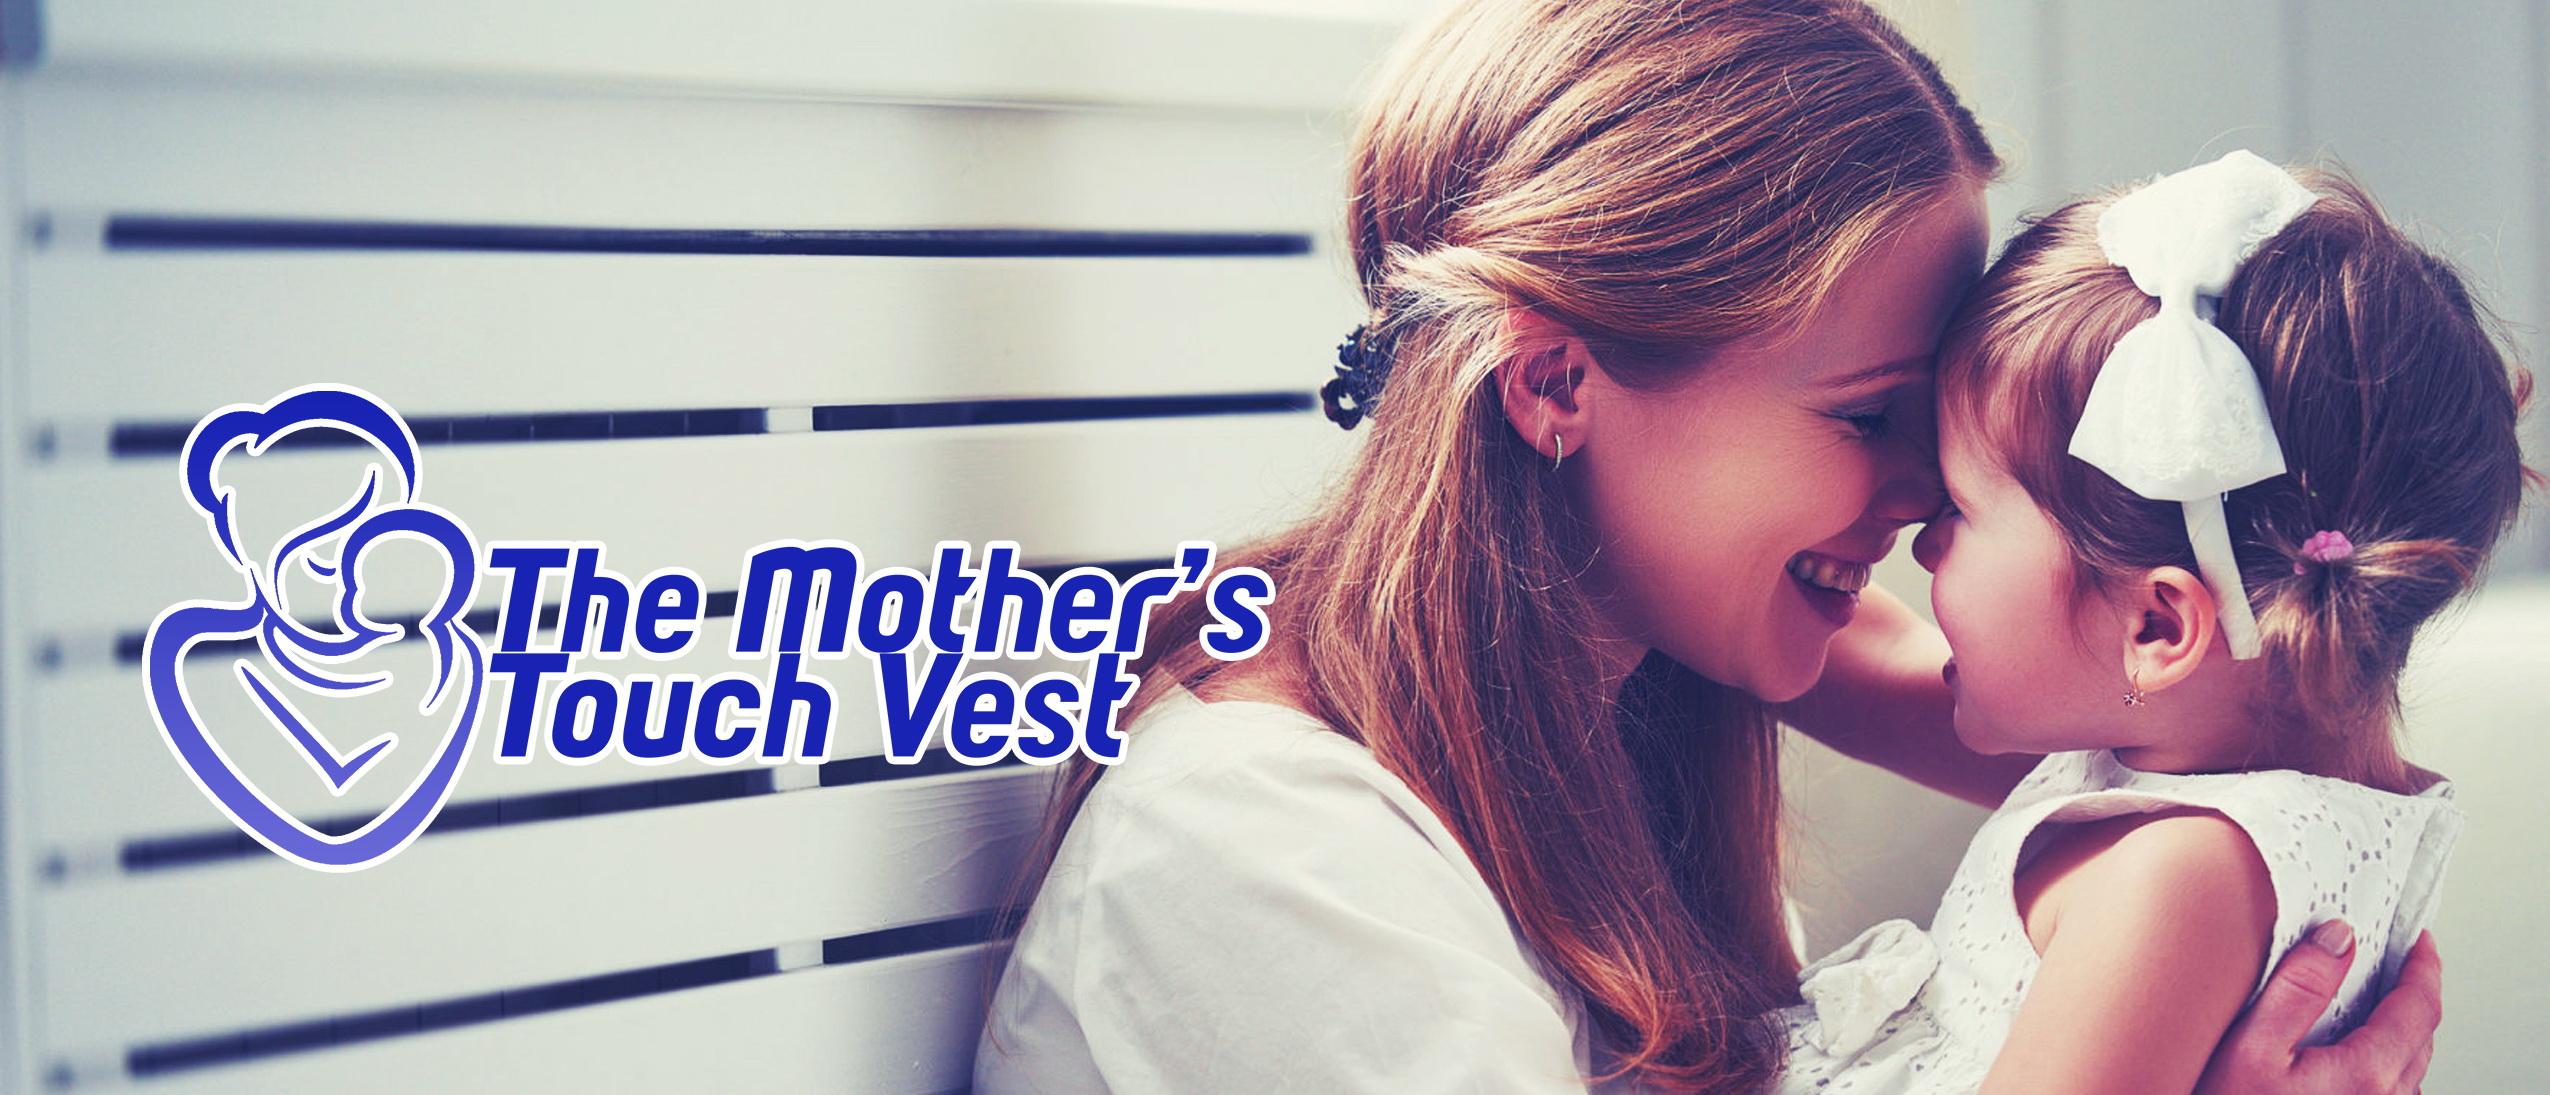 World Patent Marketing Success Group Introduces Mothers Touch Vest A